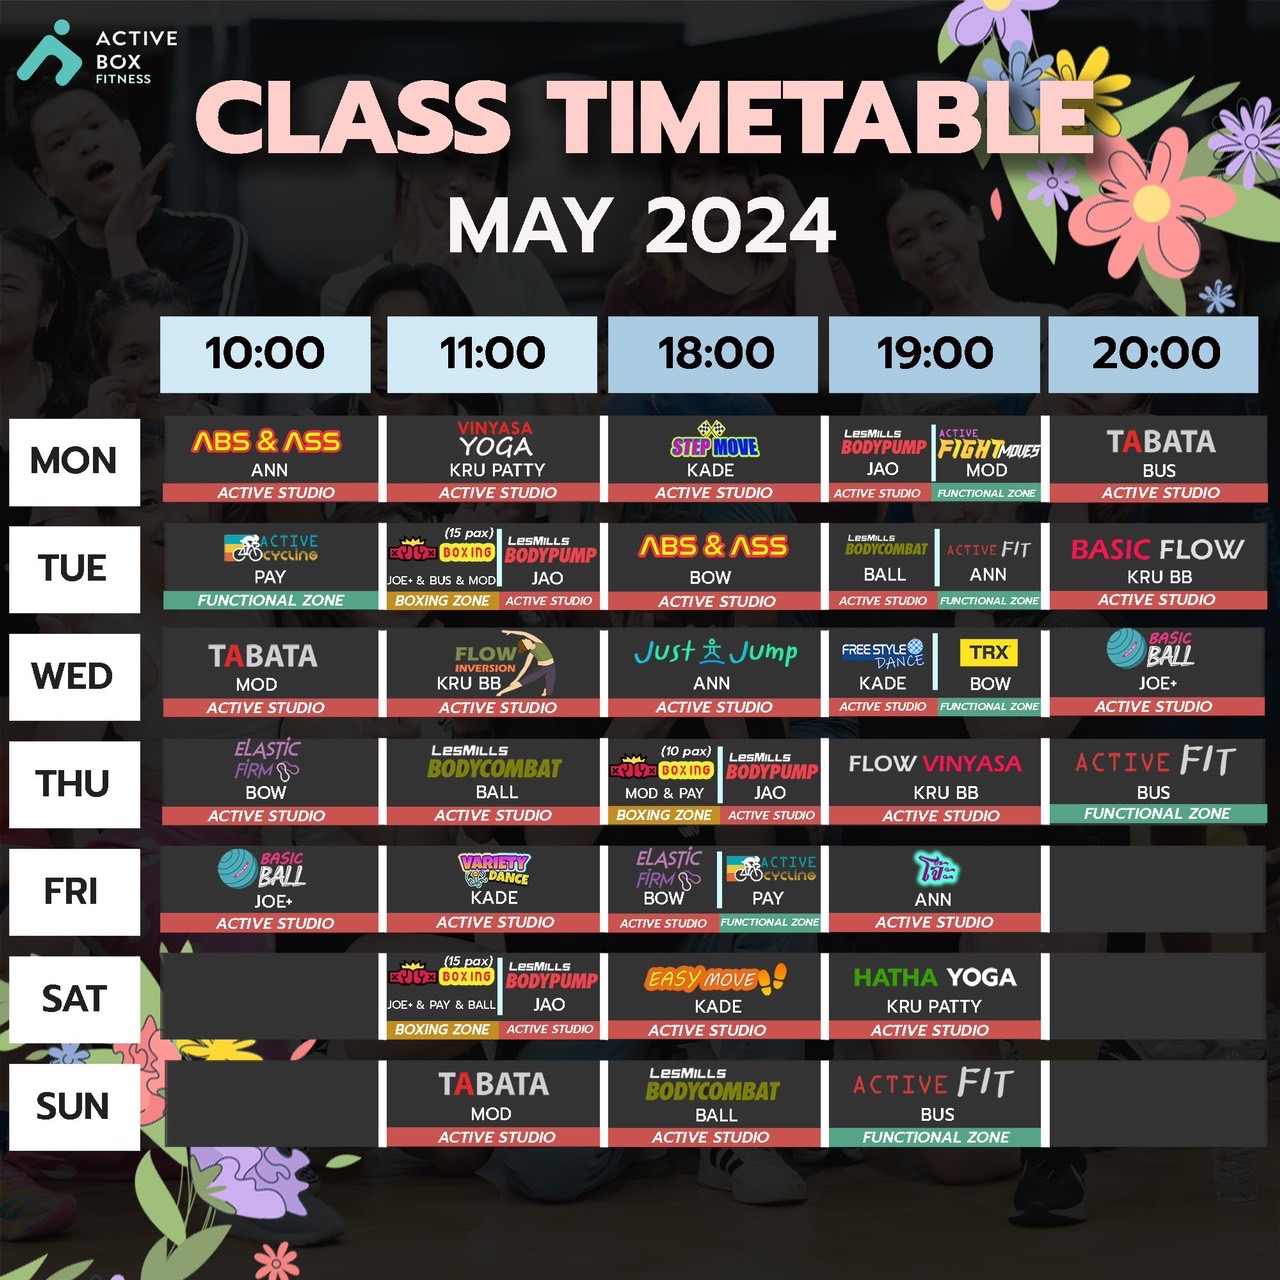 MAY TIMETABLE